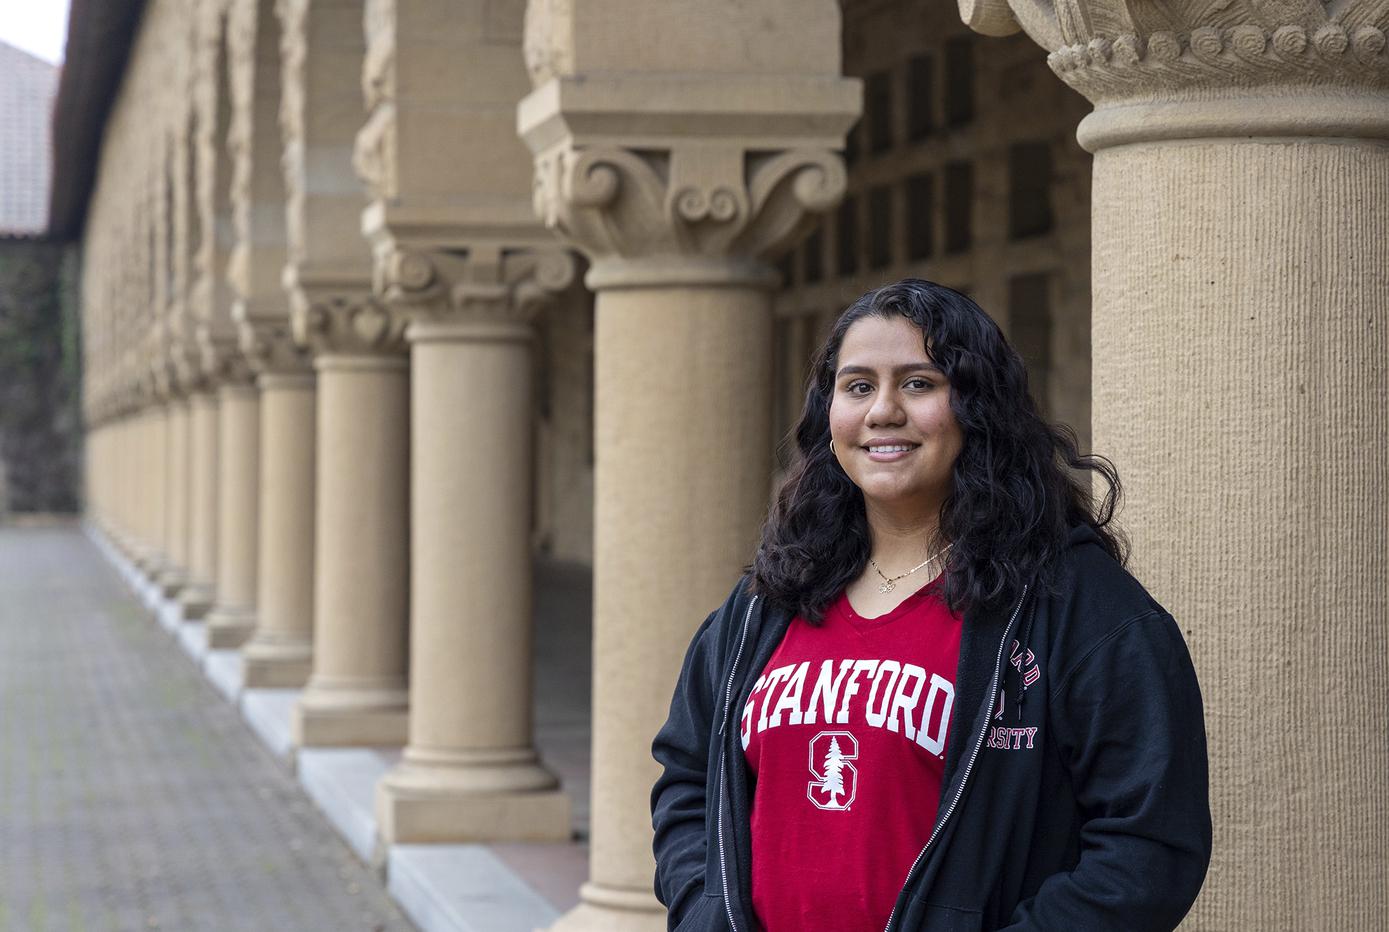 California students reflect on an unusual semester